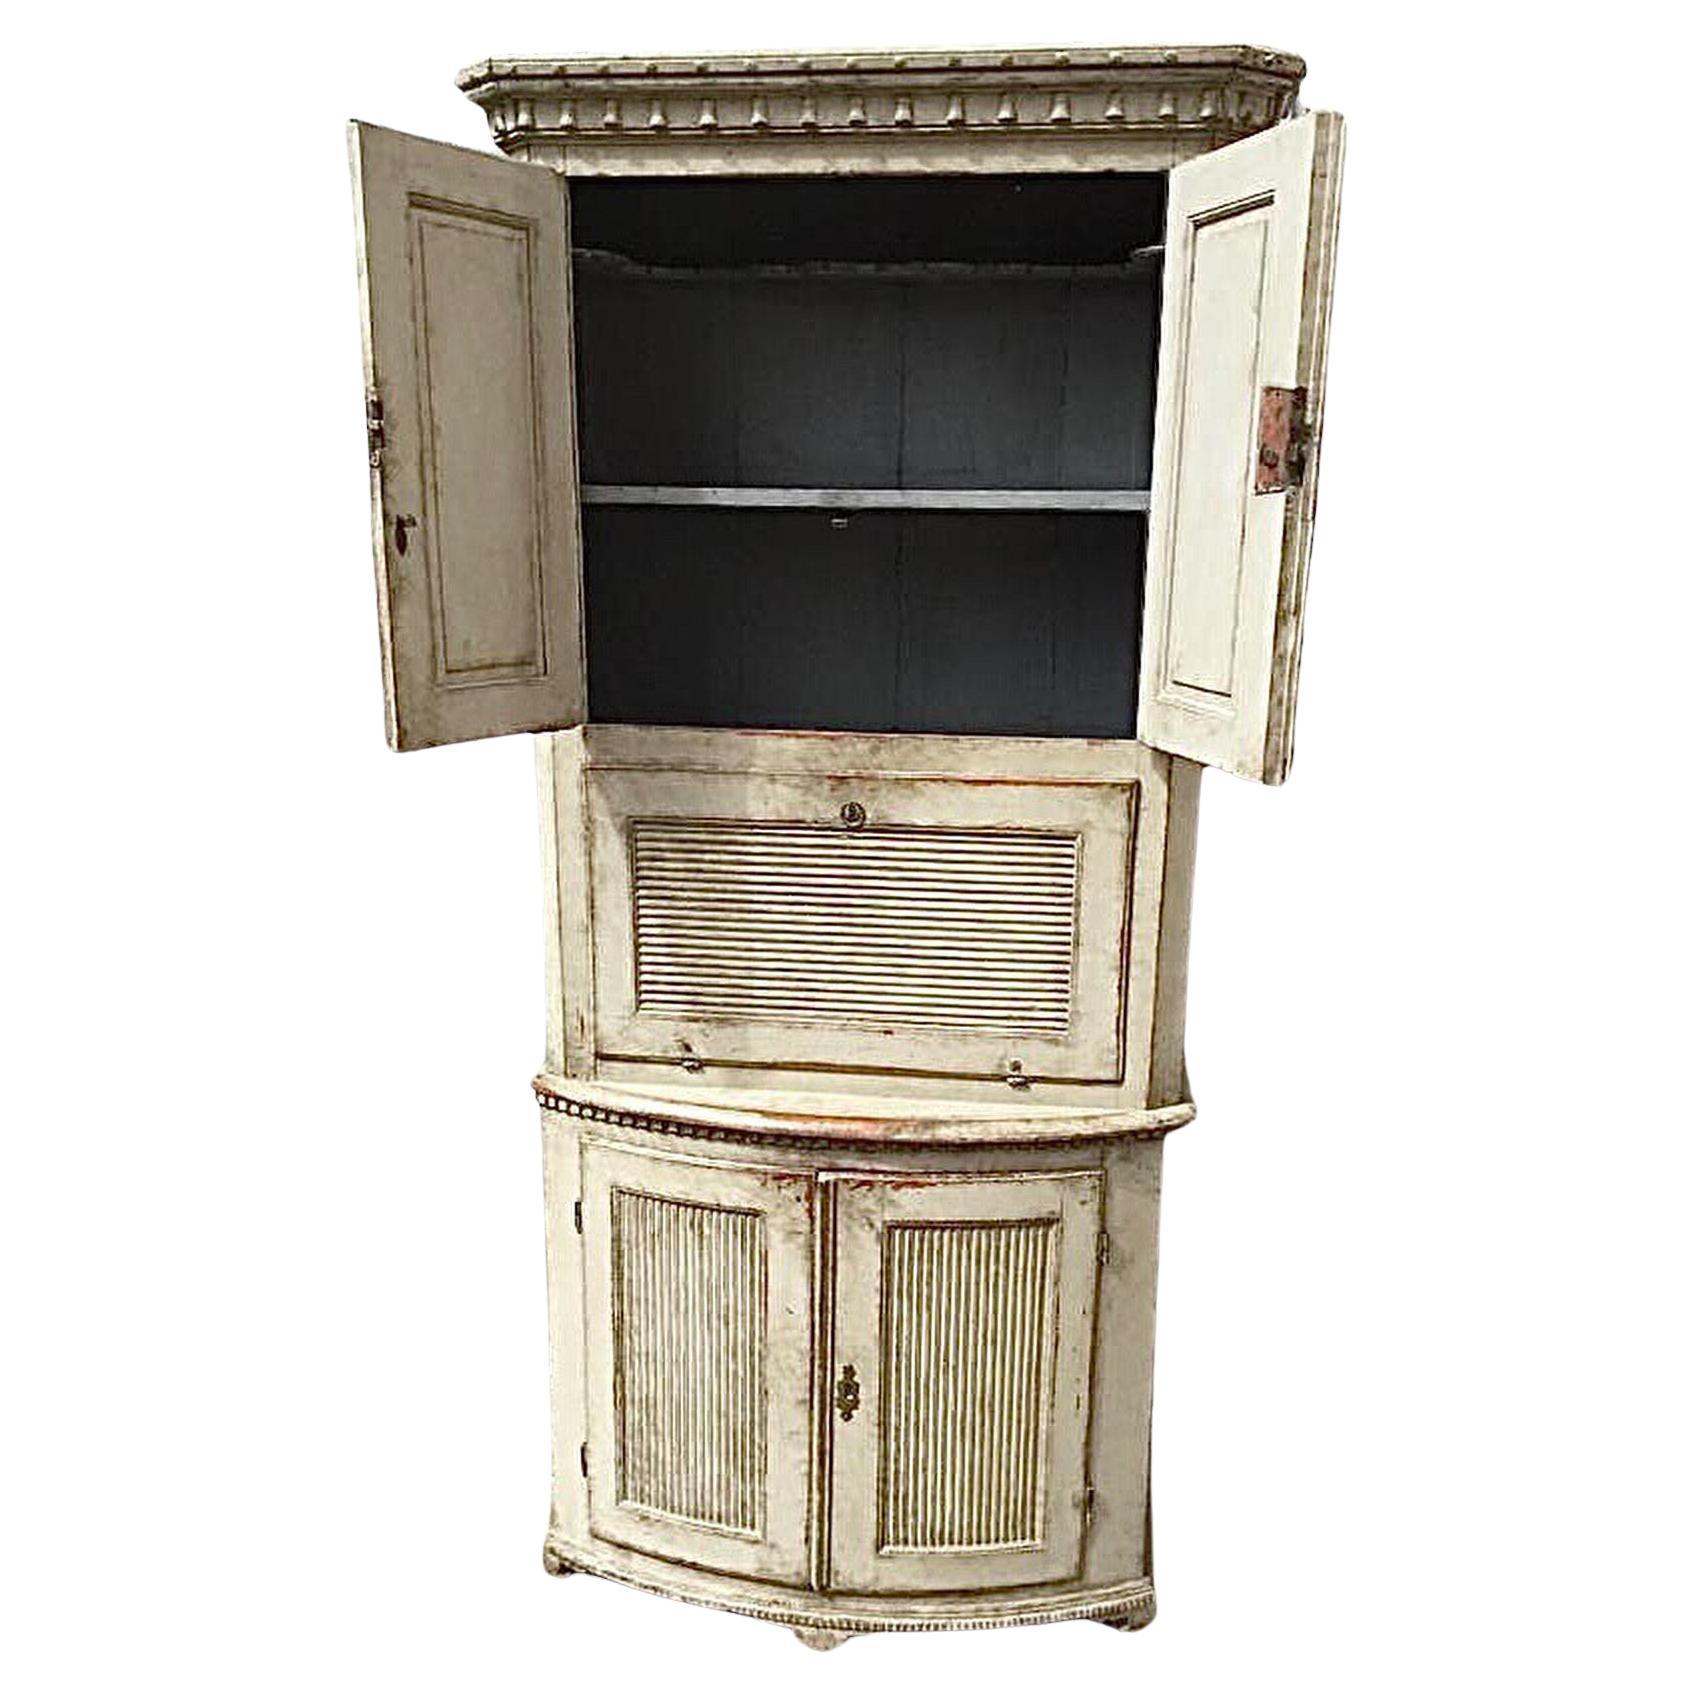 A unique and one of a kind 19th century Gustavian Swedish bar cabinet. This can be used for many things and can also function as a serving area. Paint and repairs may have been touched up over the years with previous owners. This piece breaks down